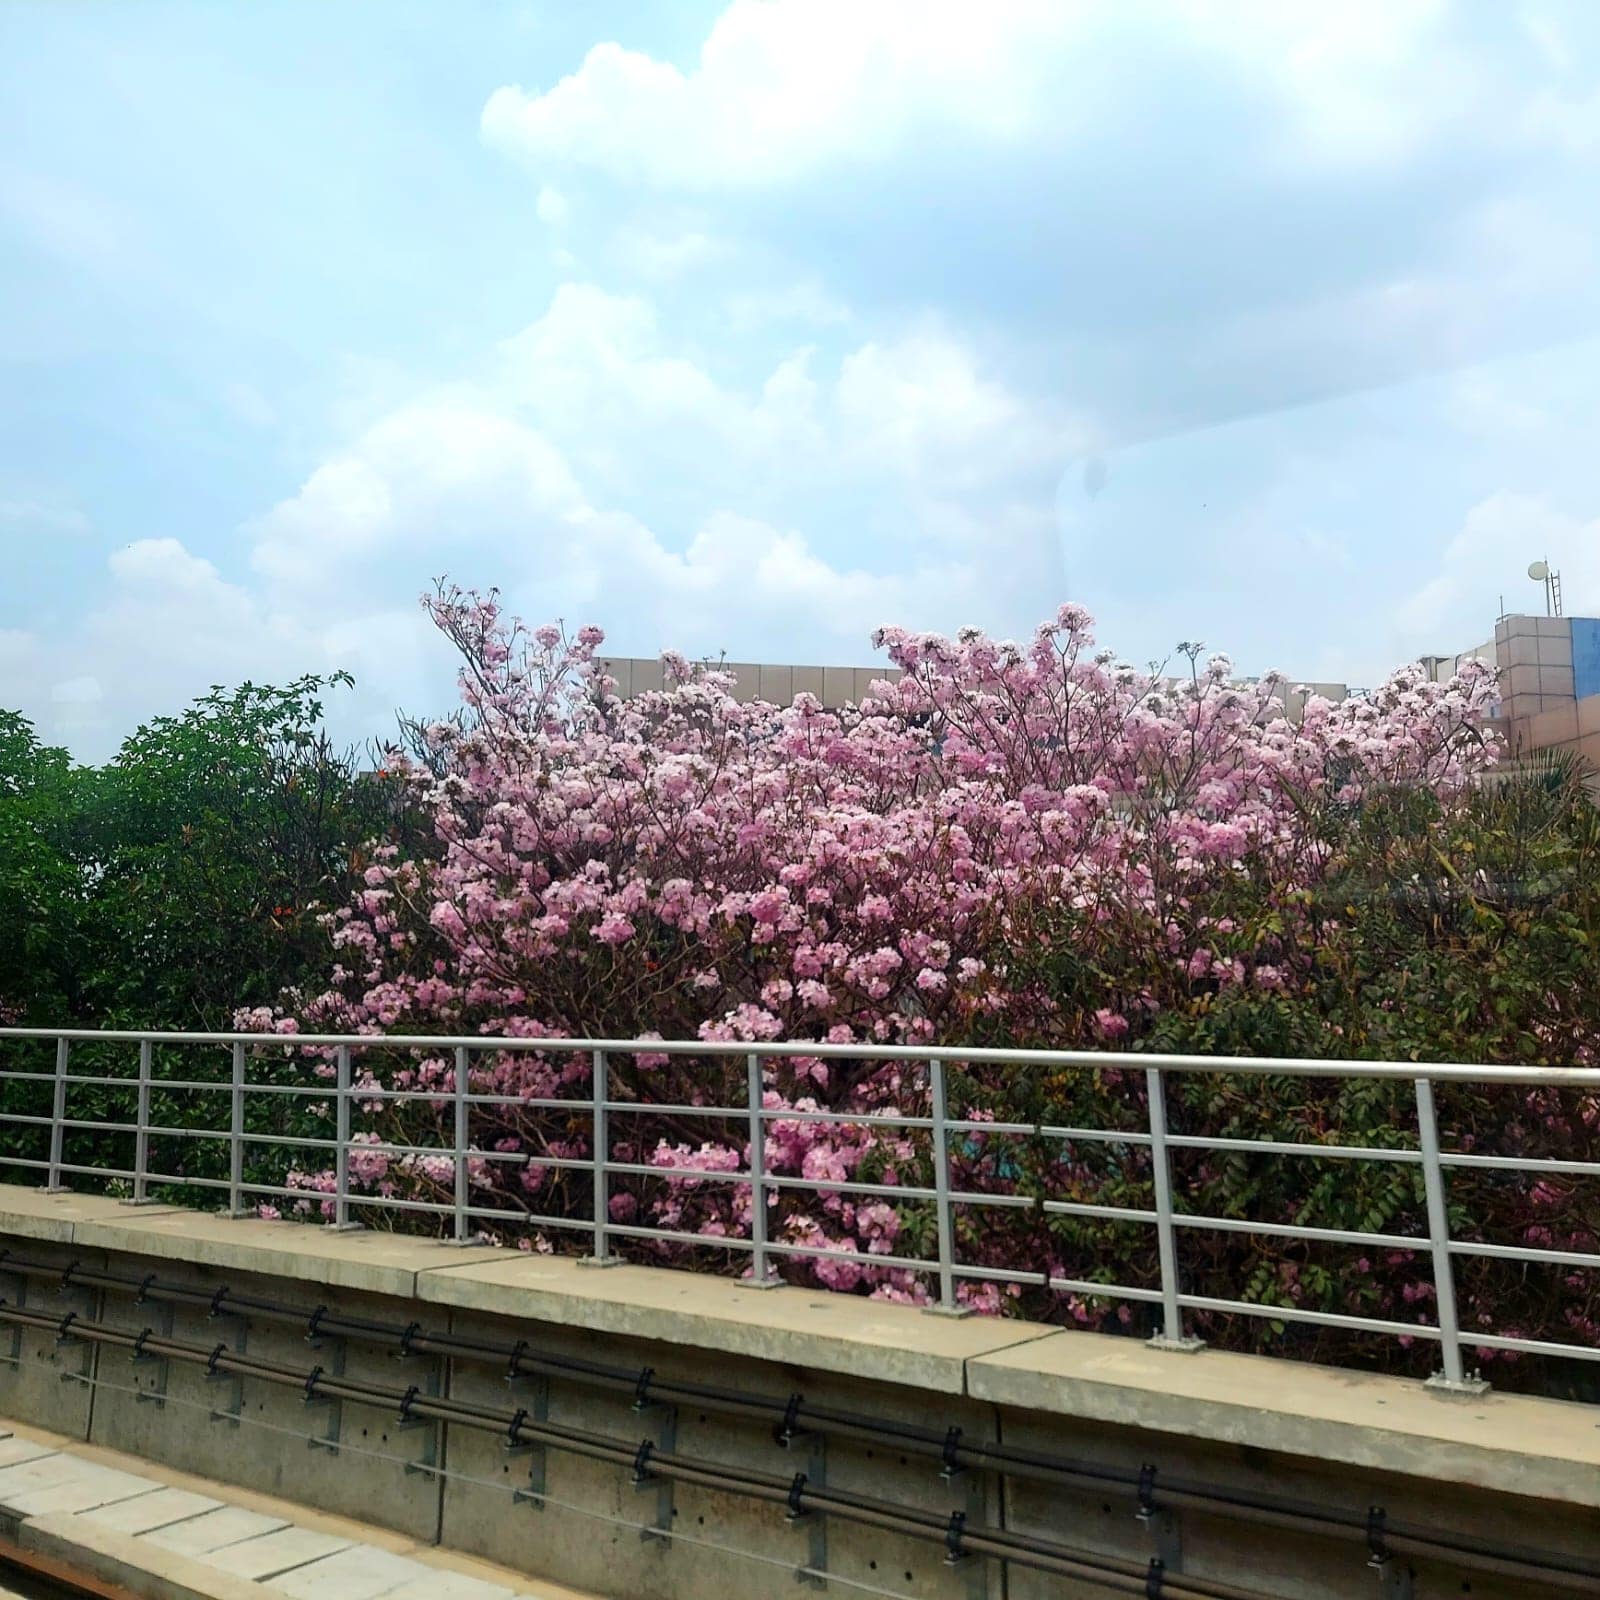 Tabebuia Rosea trees in full bloom along the Whitefield Metro section.